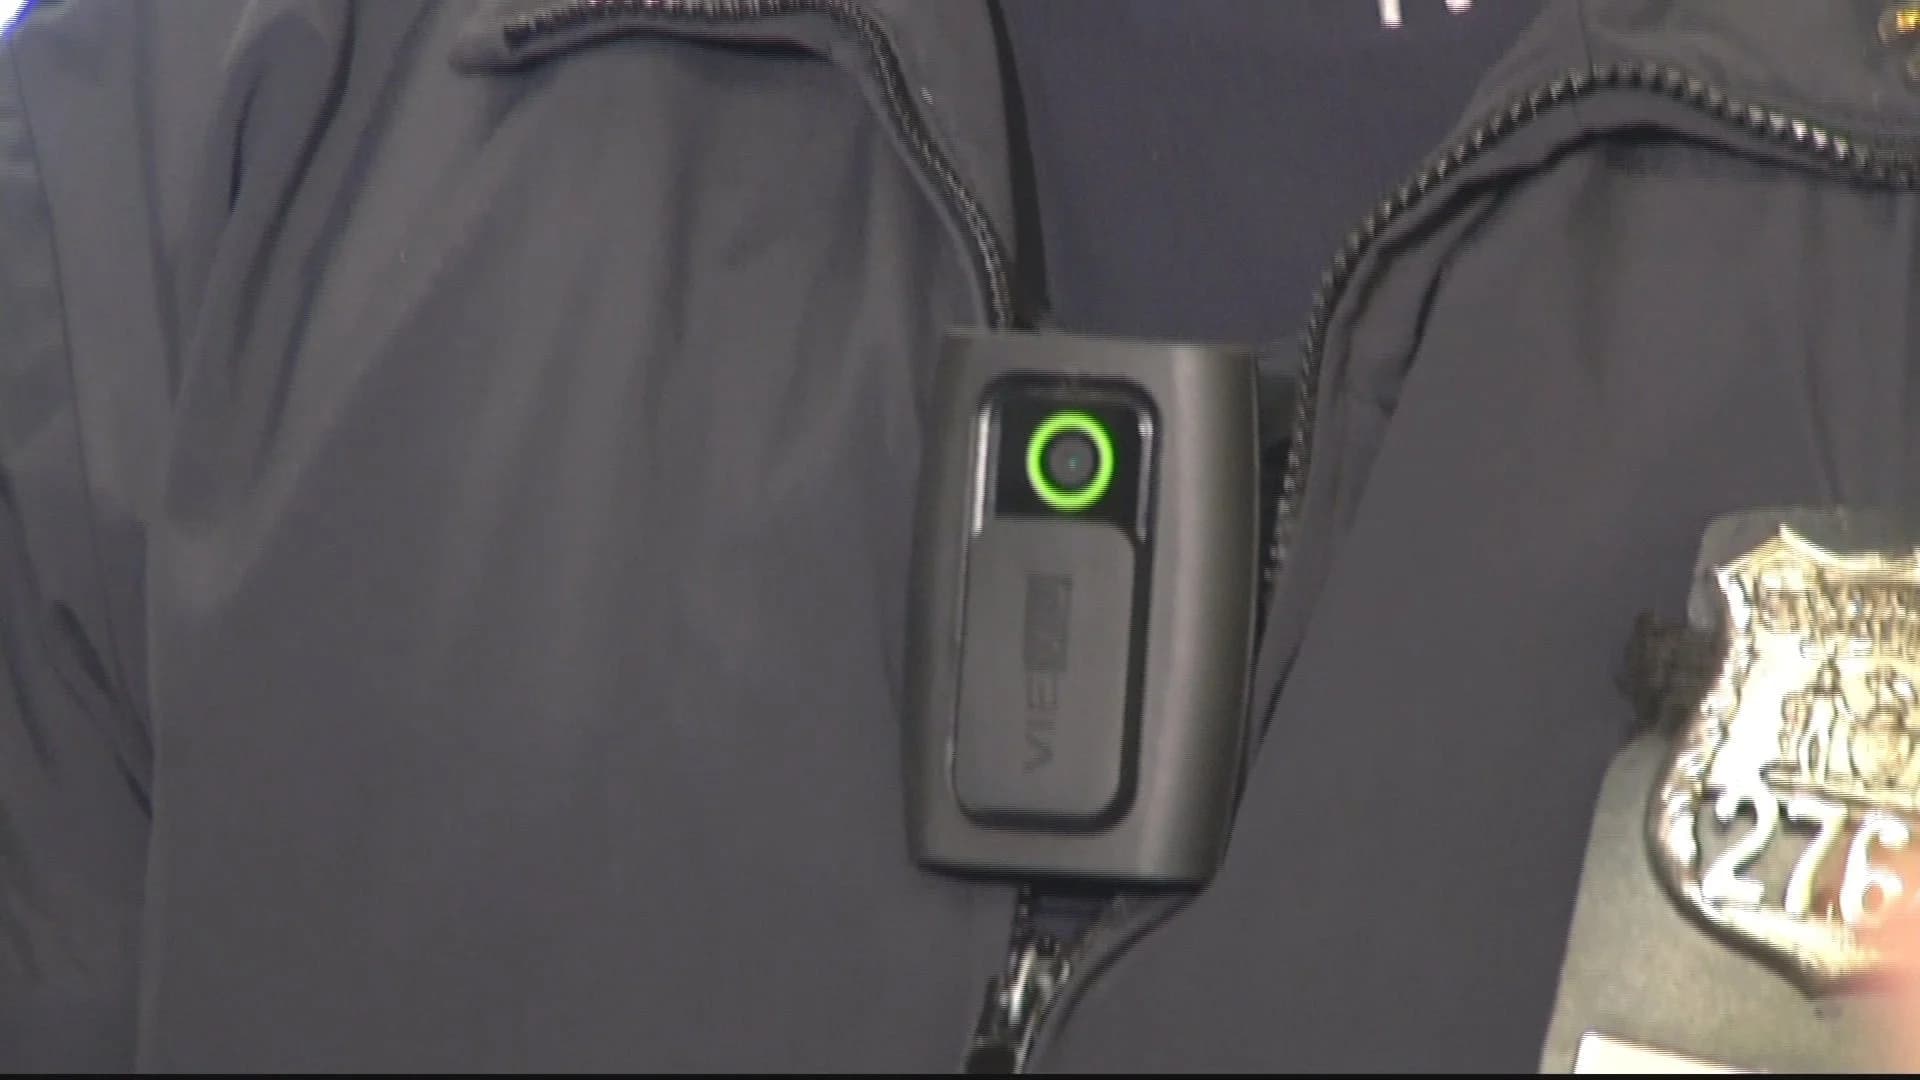 NYPD patrol officers begin wearing body cameras